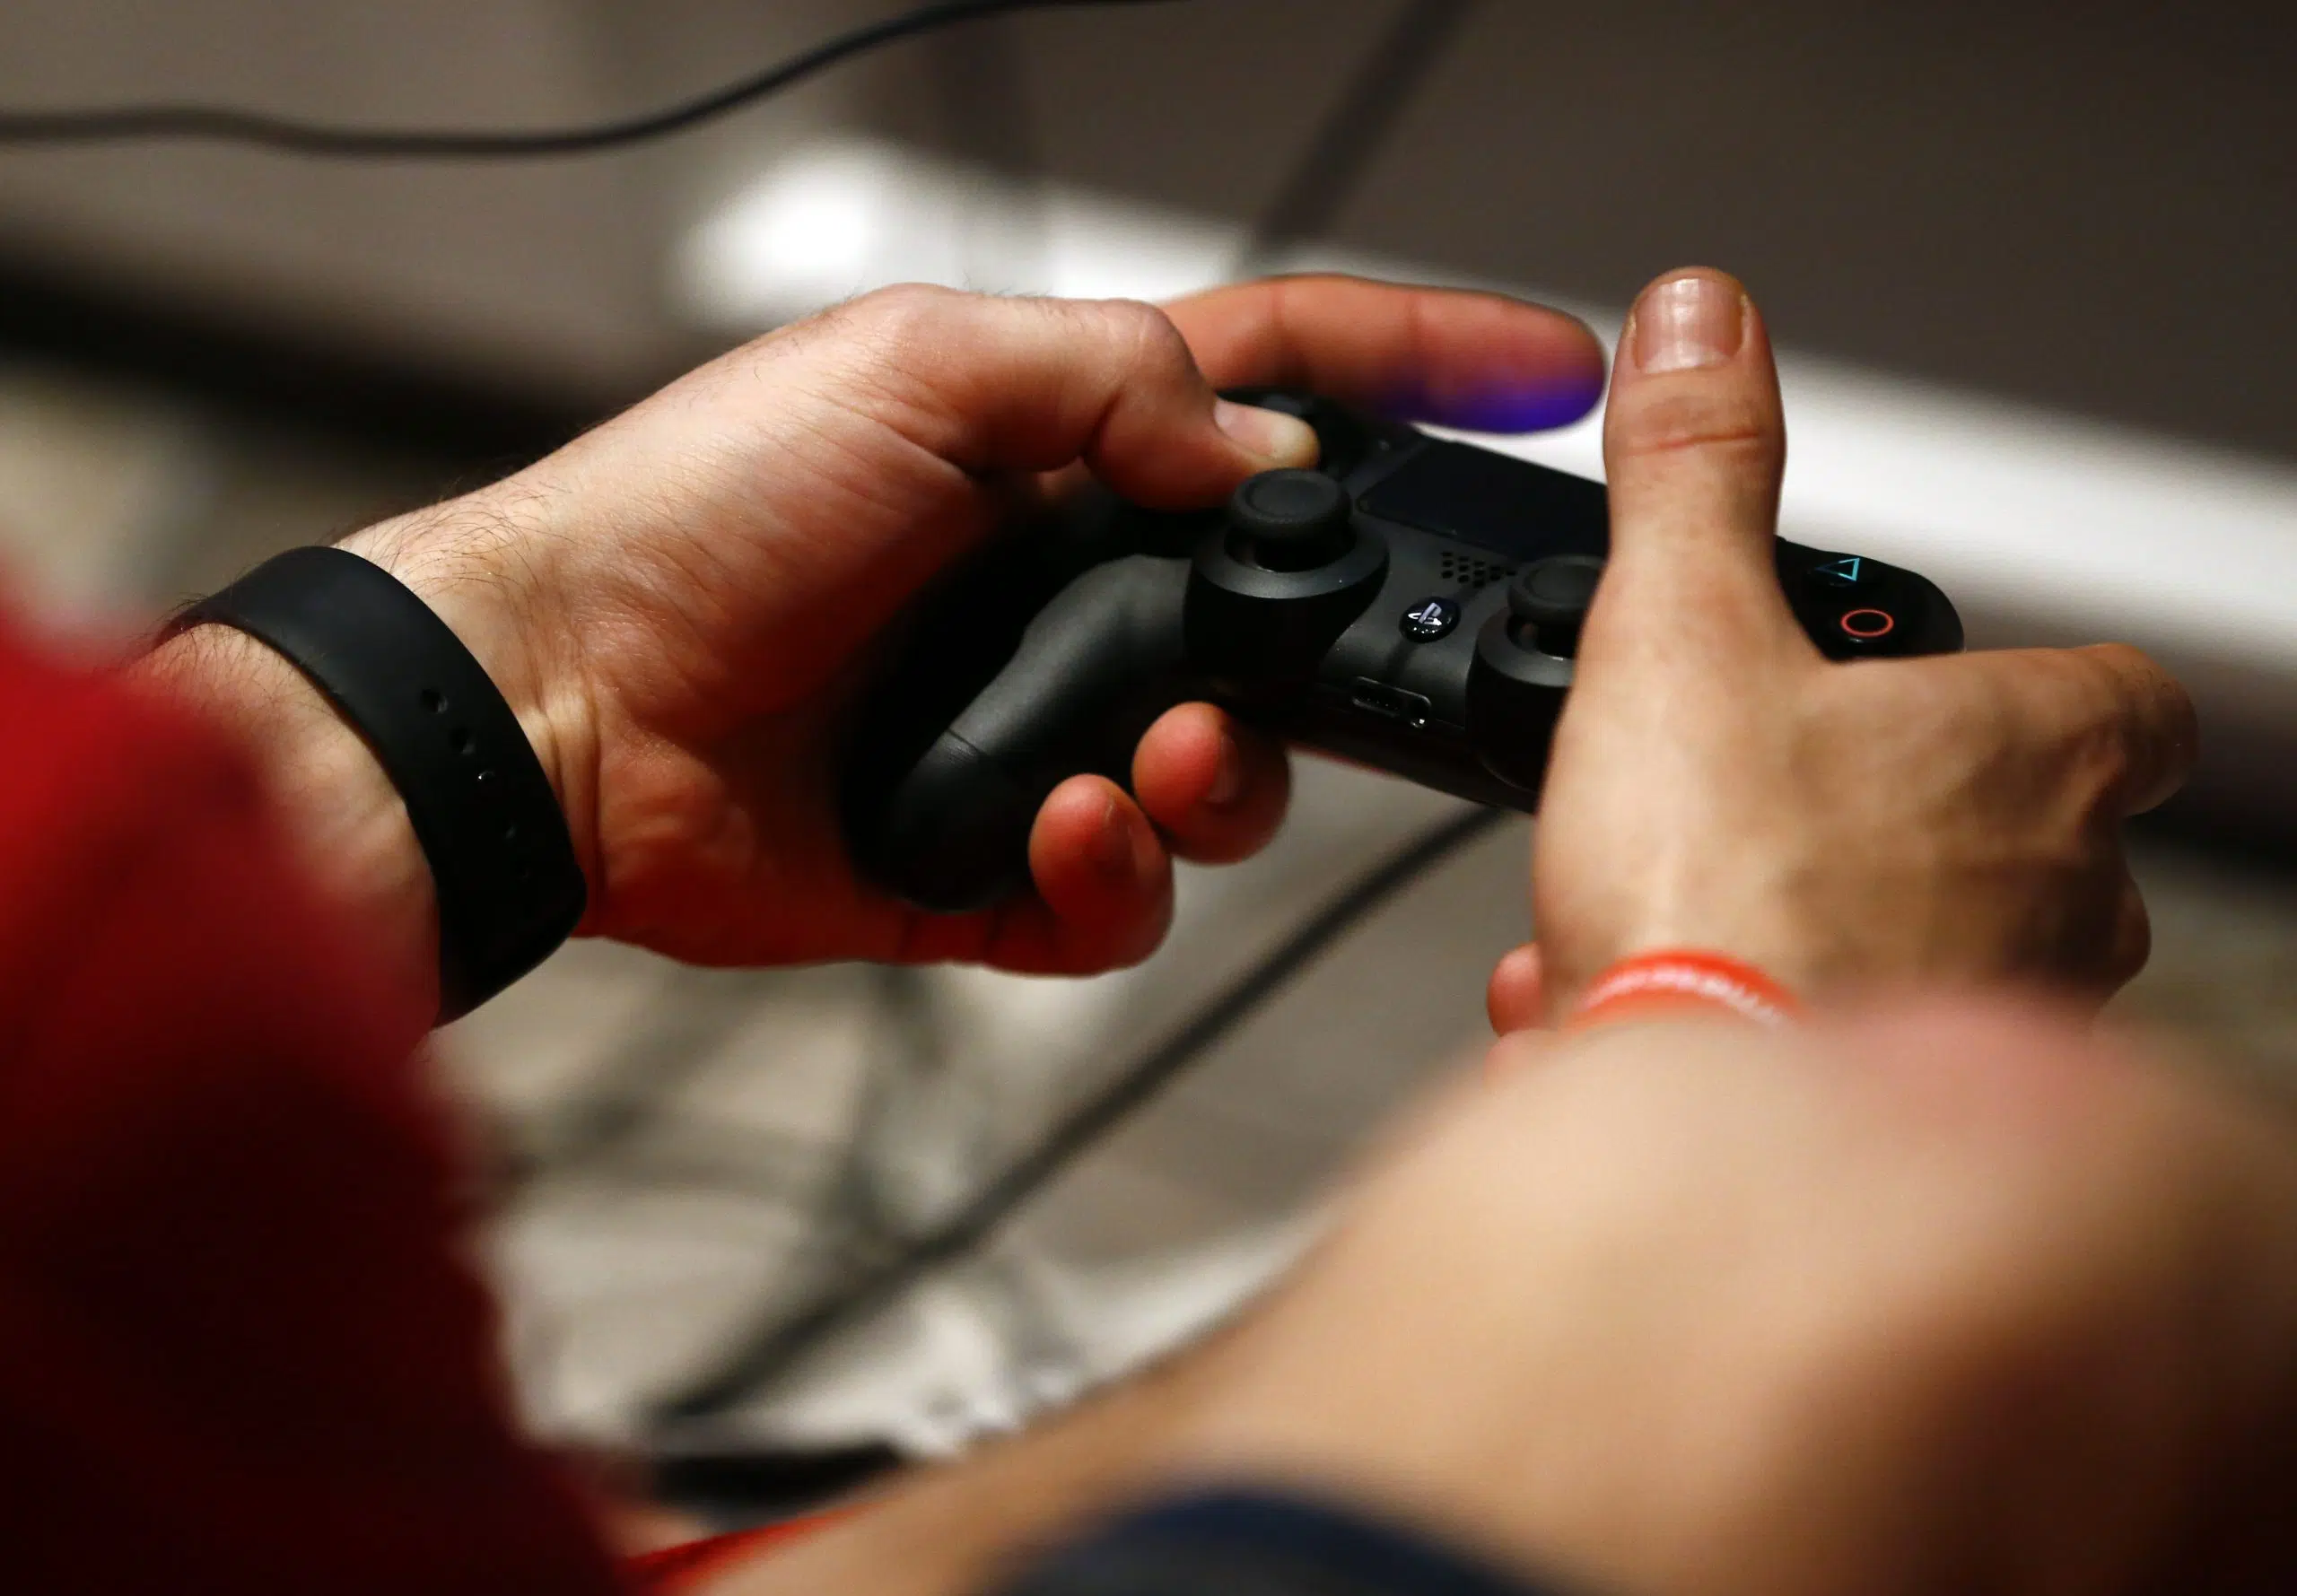 Nevada Video Gamers Red Hot, Among Most Likely To Rage Quit